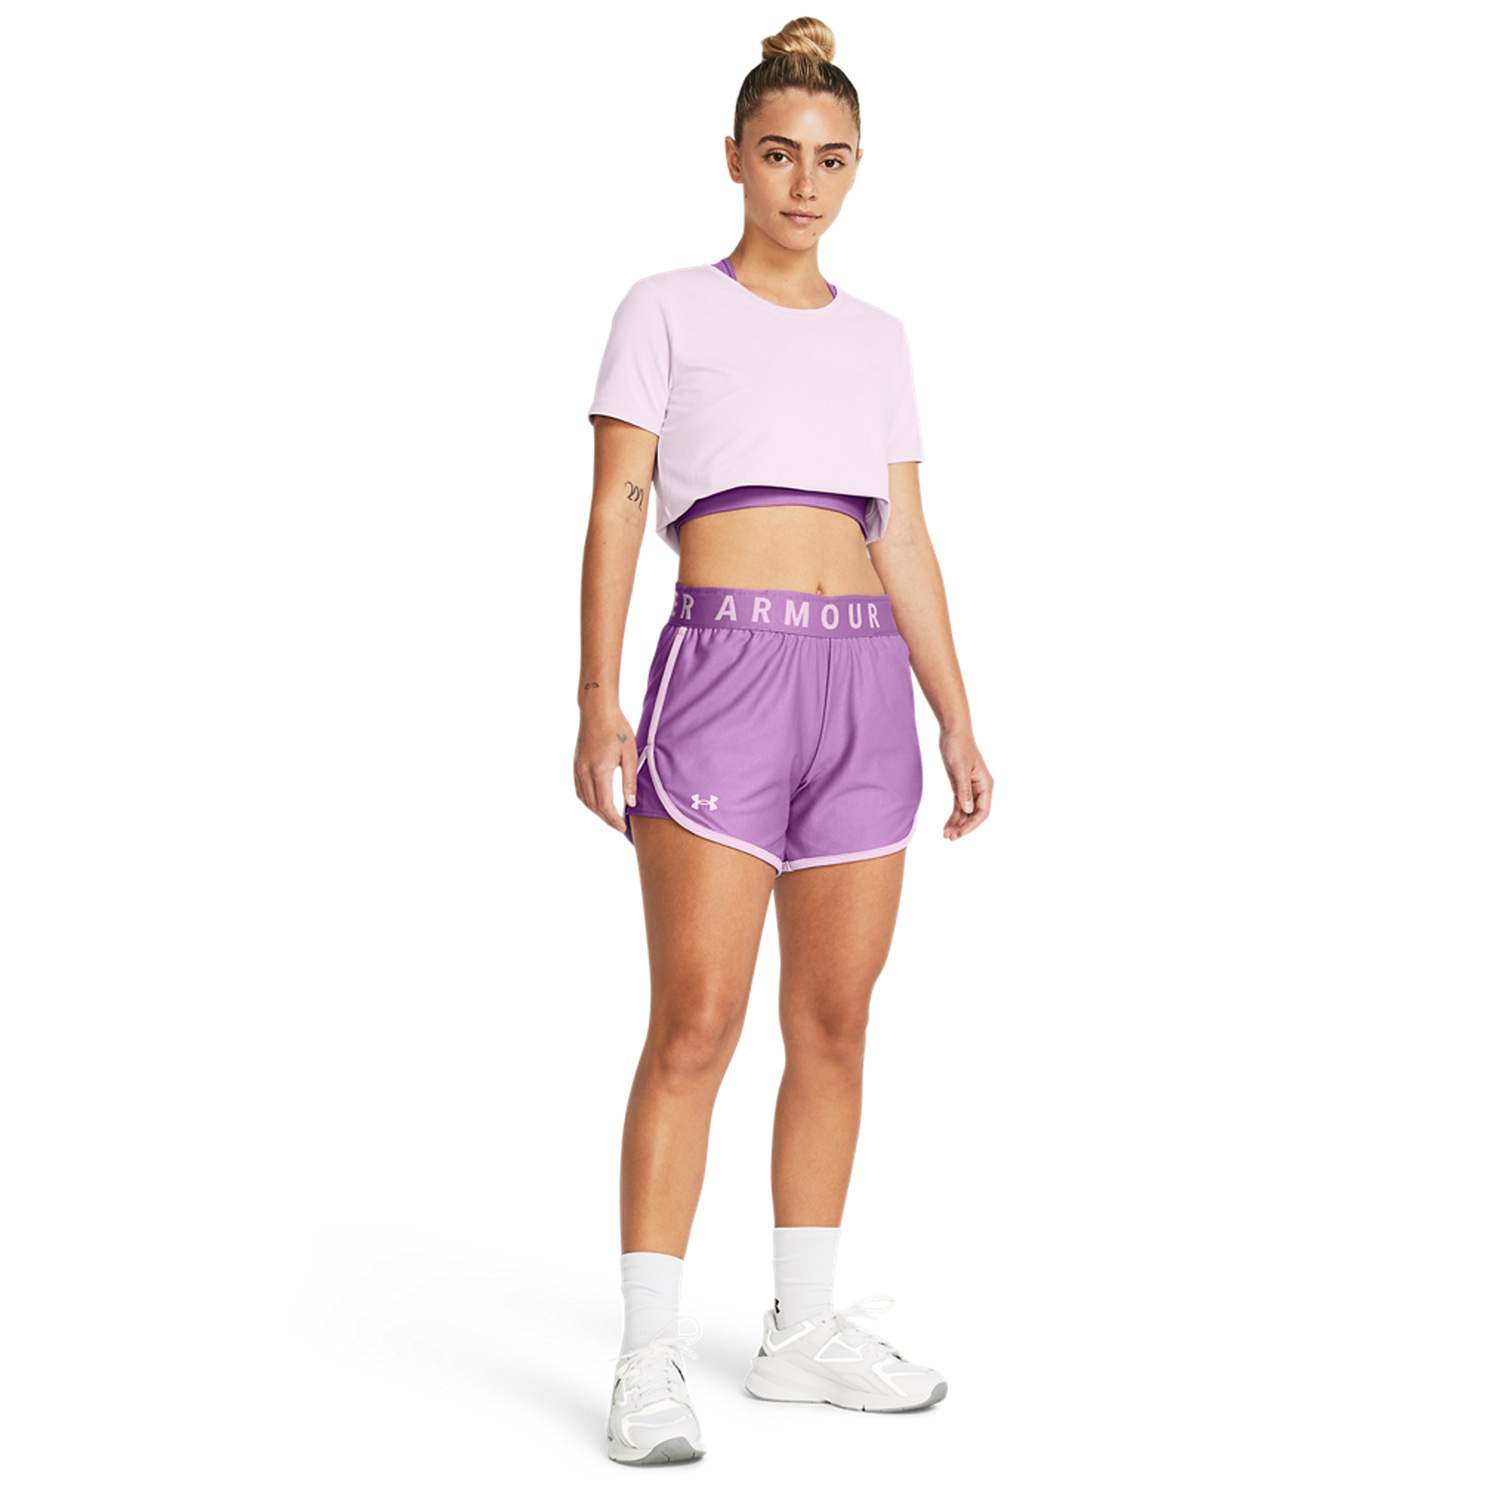 Under Armour Play Up 5in Shorts - Provence Purple/Purple Ace